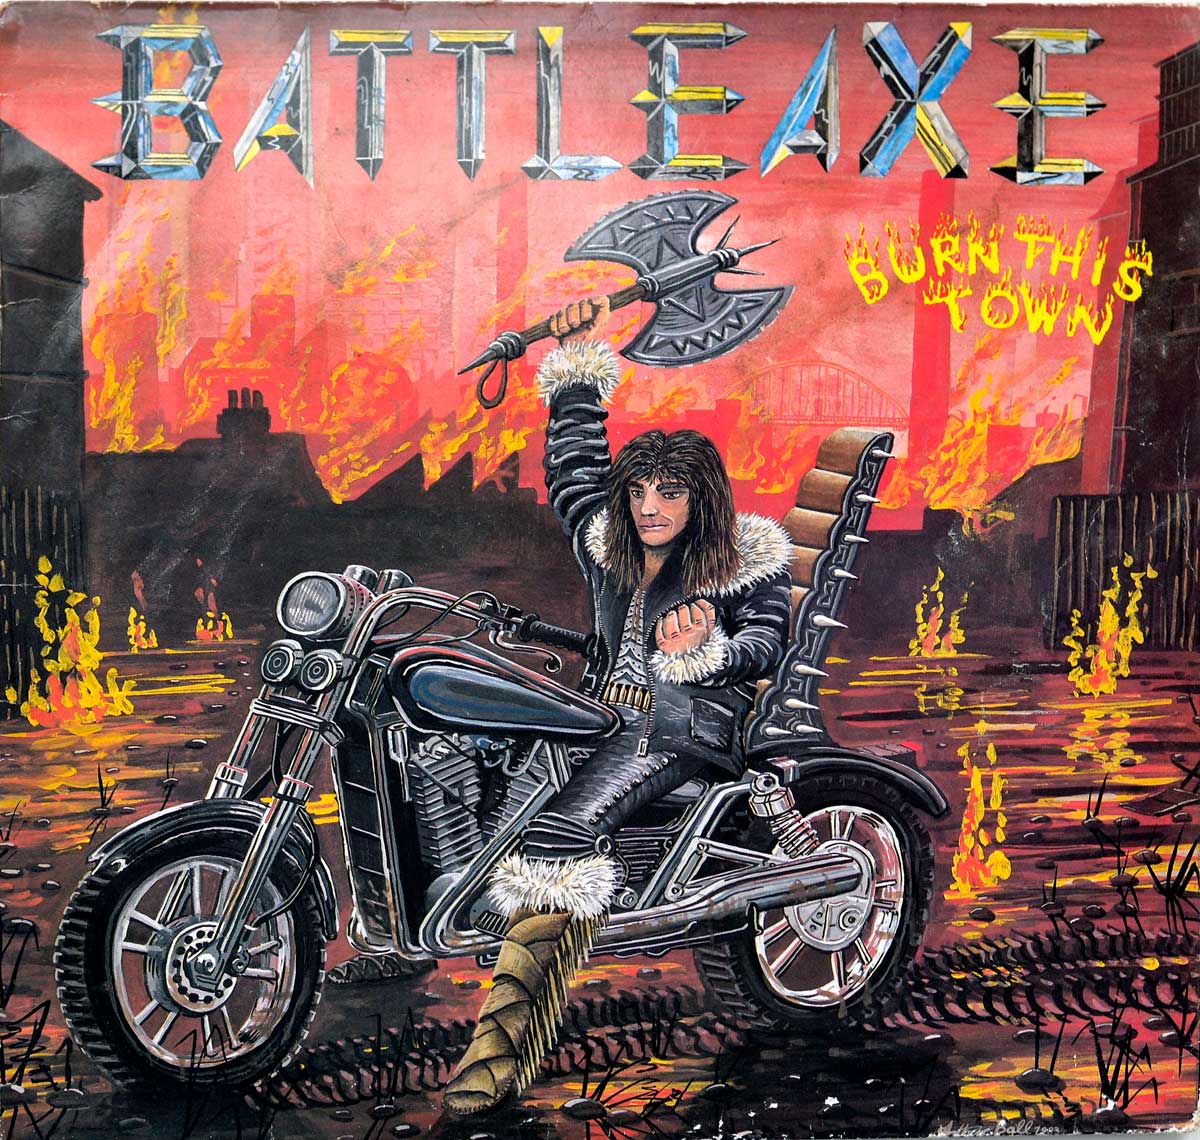 large album front cover photo of: BATTLE-AXE BATTLEAXE Burn This Town 